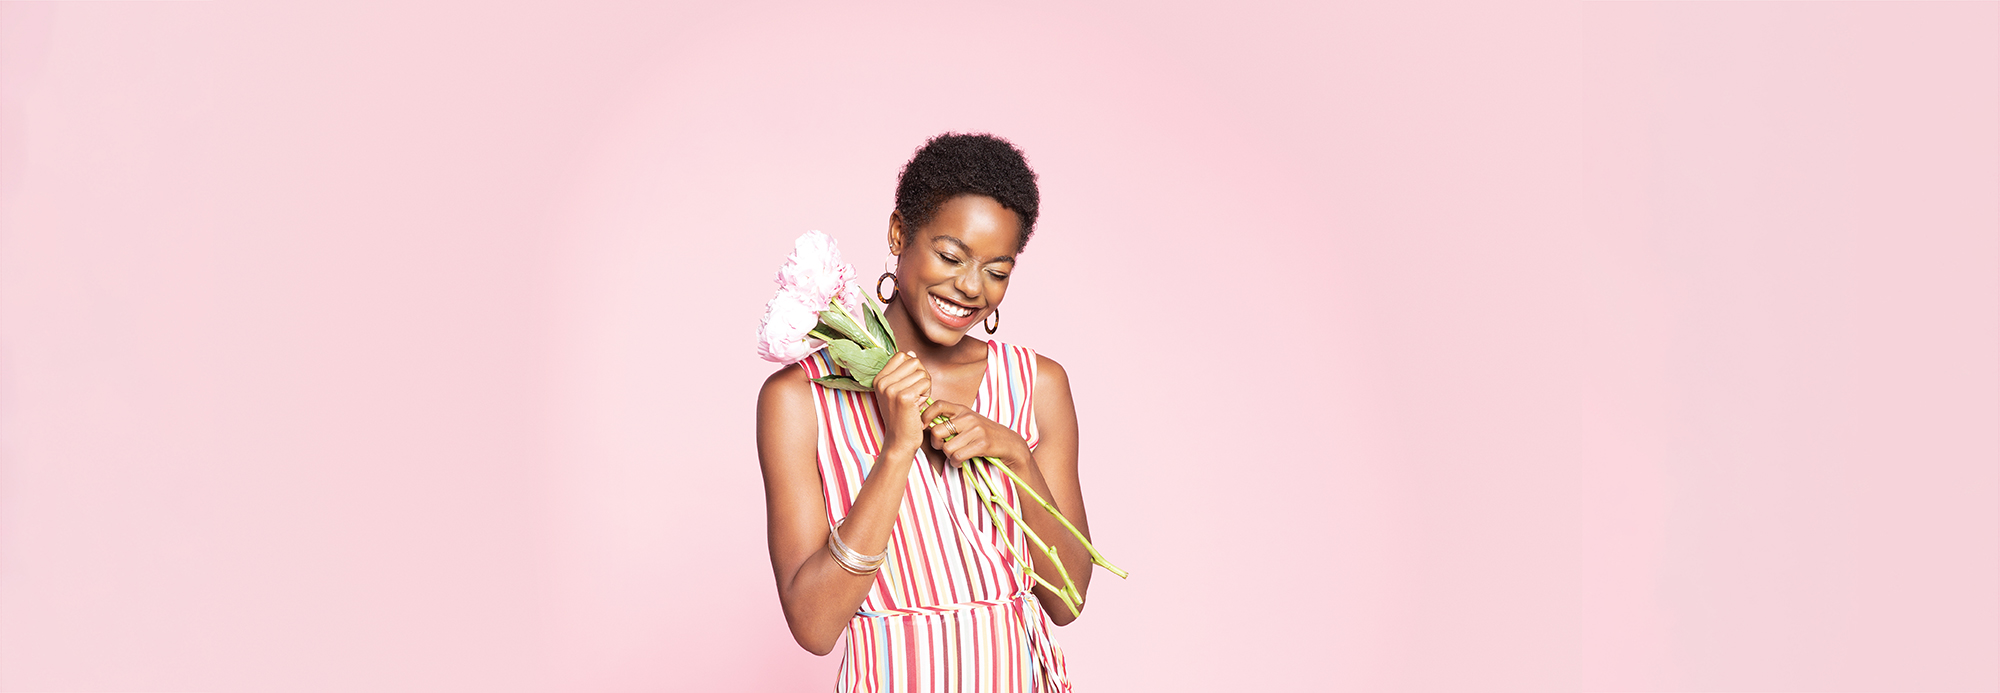 A smiling young woman holding a bouquet and wearing a striped sundress standing in front of a pink background